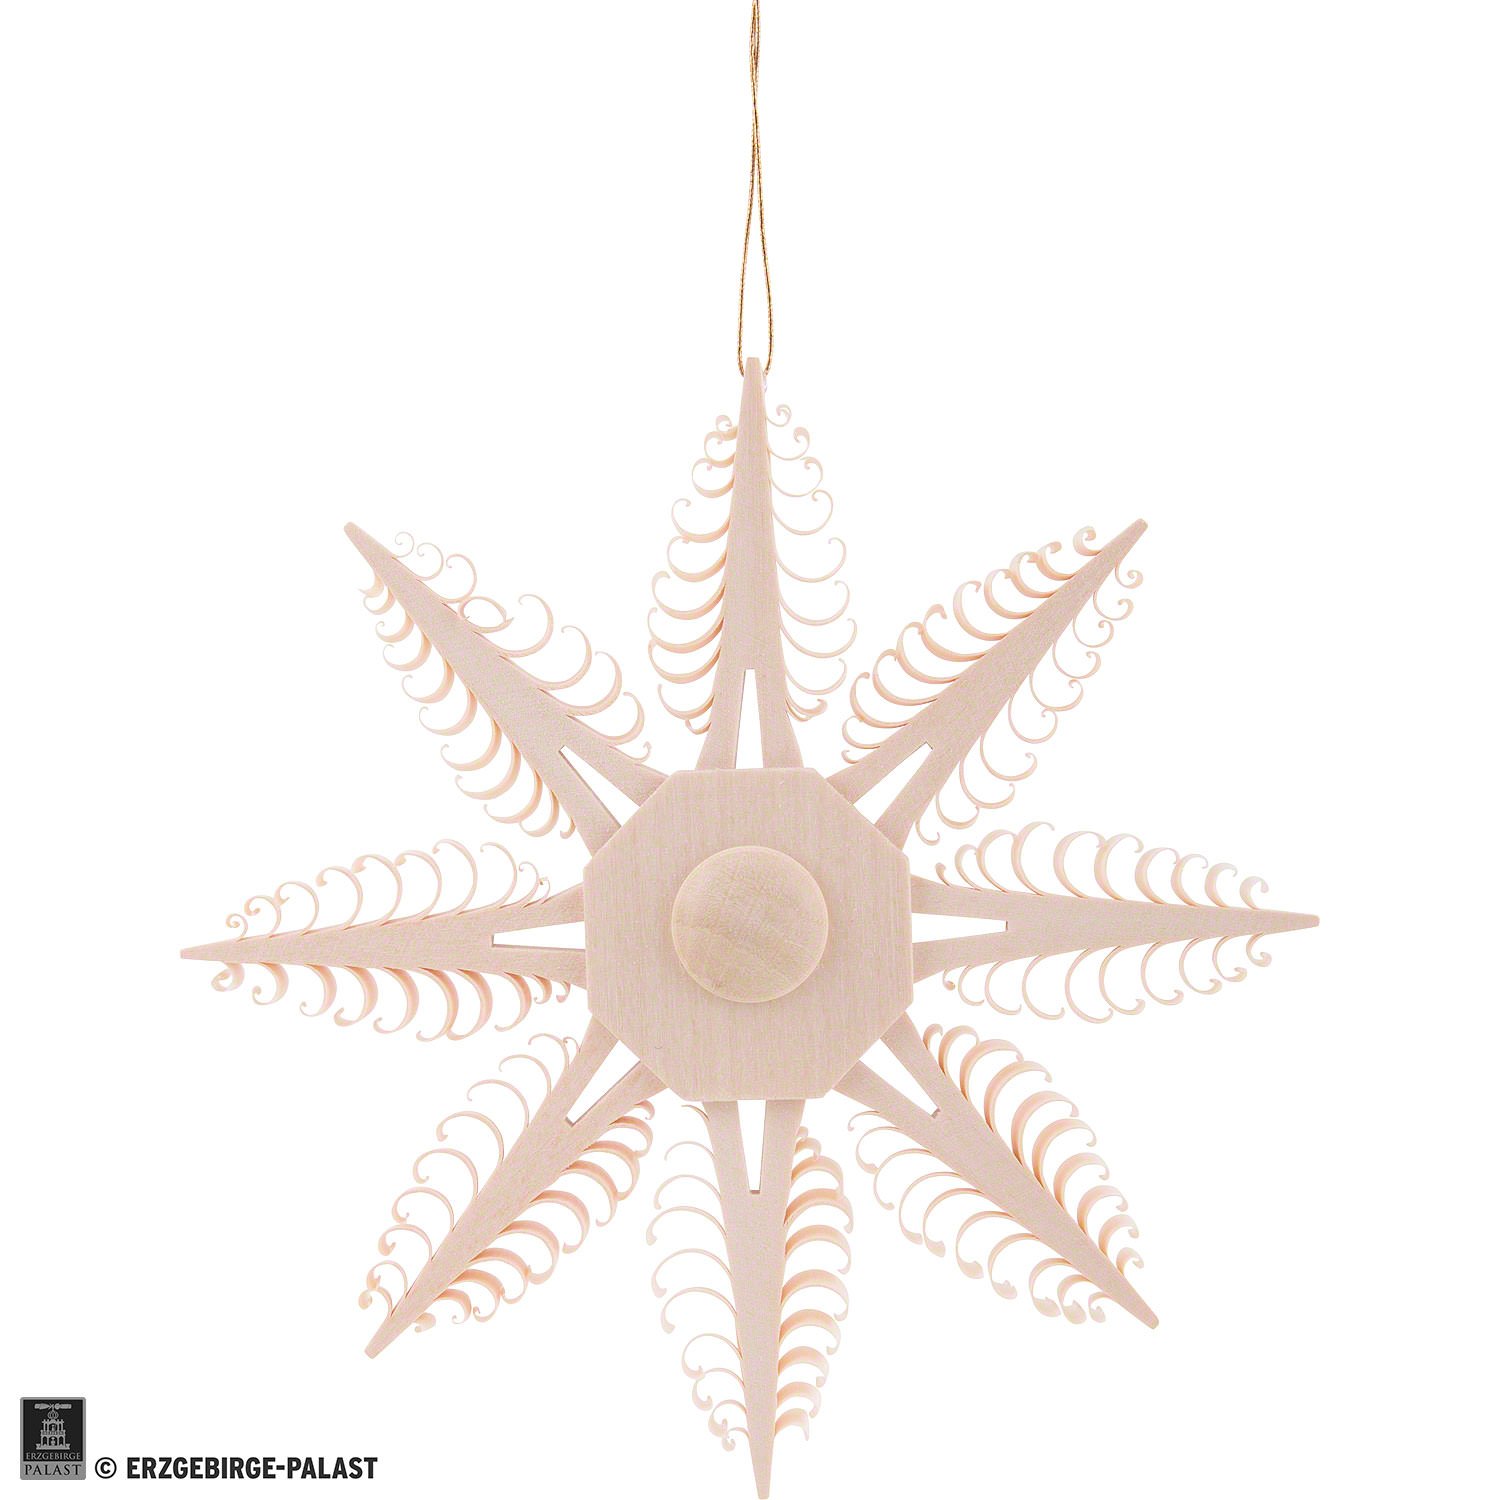 Tree Ornament - Wood Chip Star (12,5 cm/4.9in) by Dregeno Seiffen